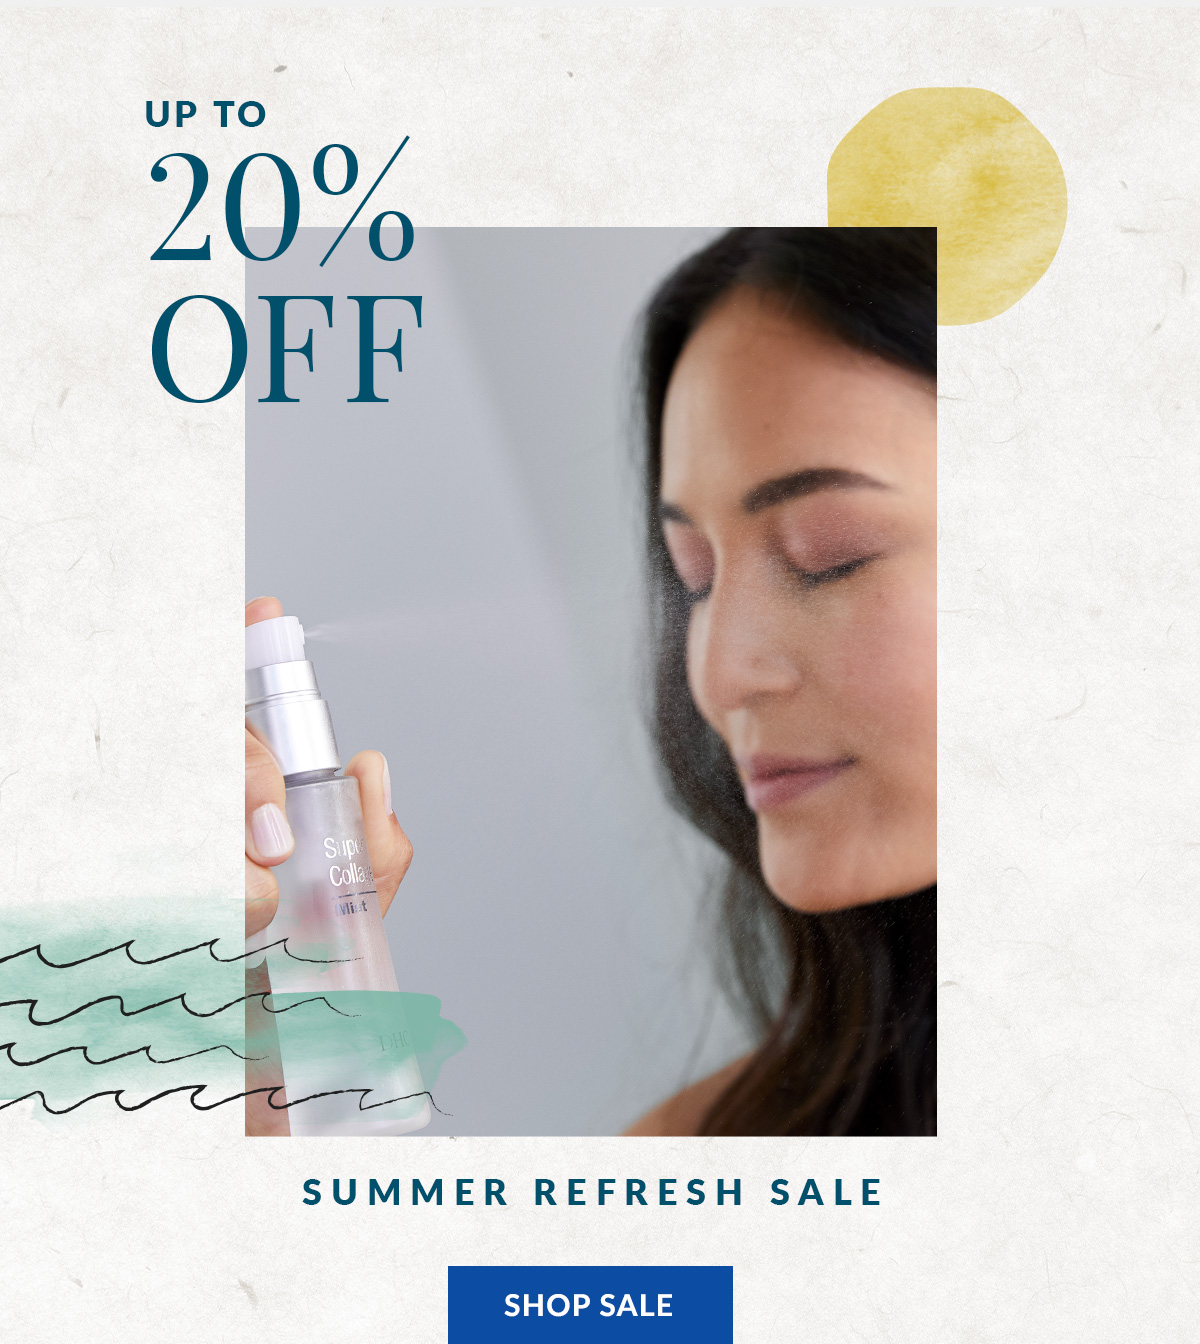 Summer Refresh Sale up to 20% off 